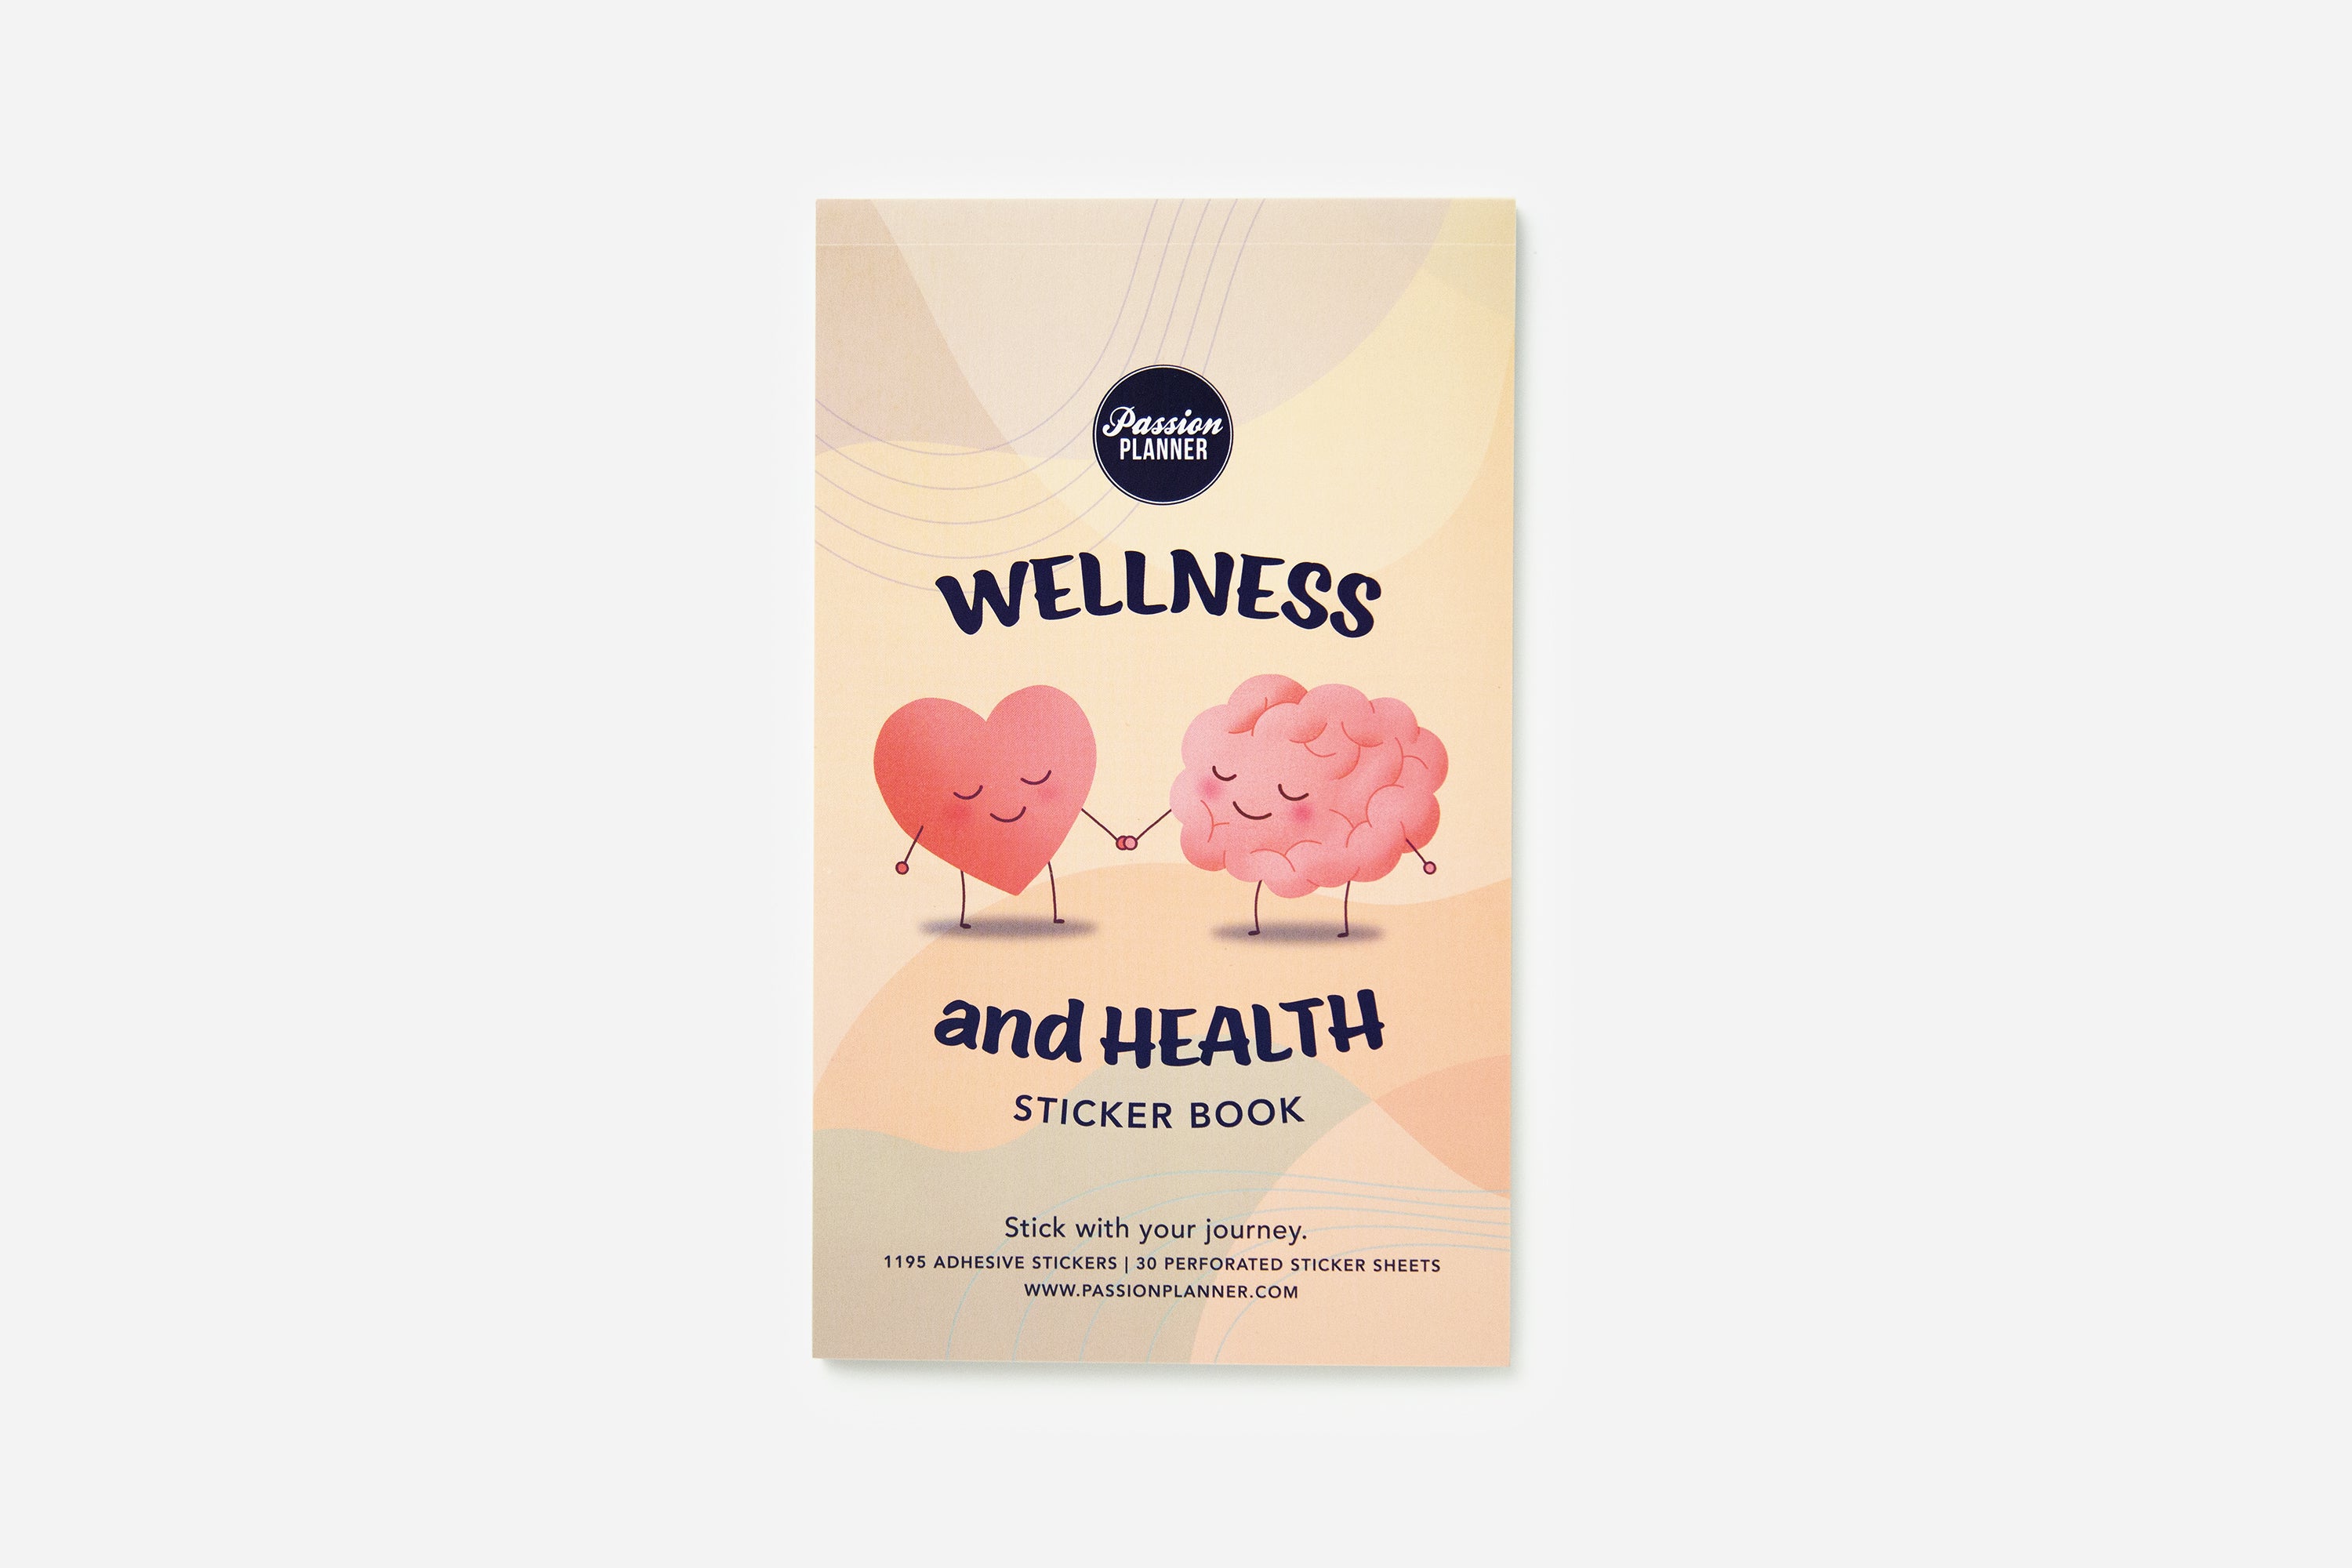 Wellness and Health Sticker Book - Passion Planner